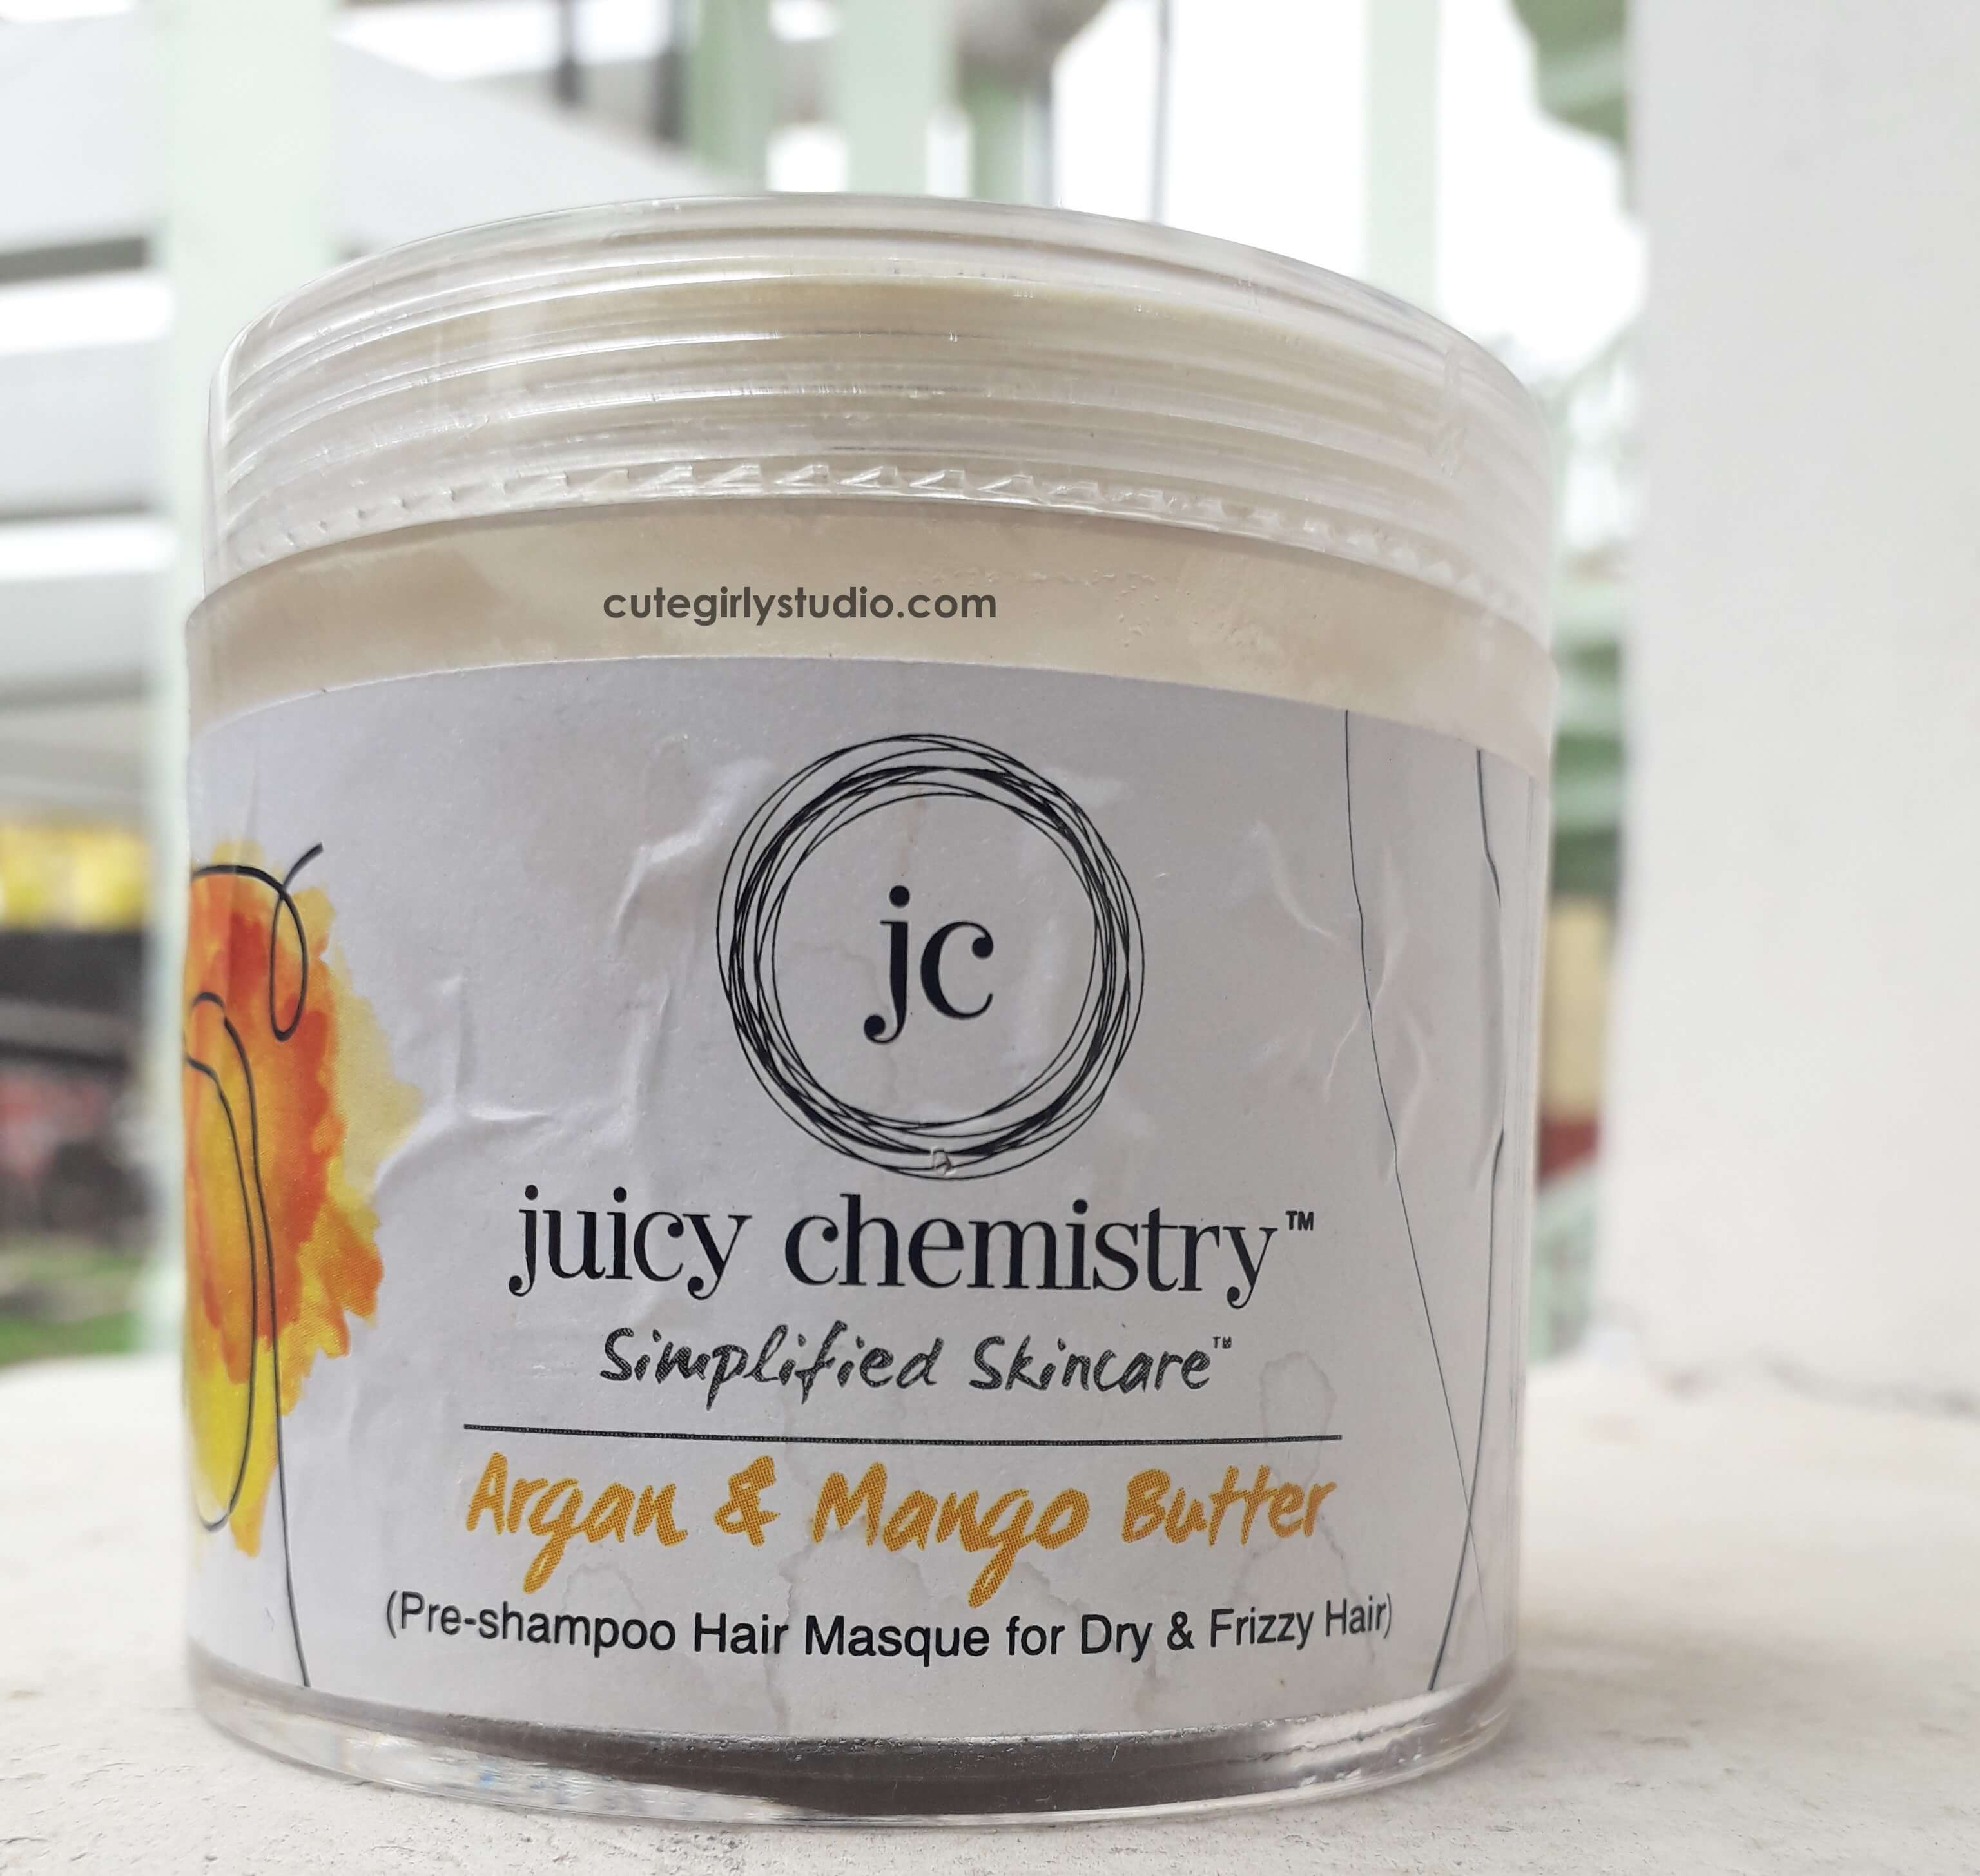 Juicy chemistry argan and mango butter hair masque